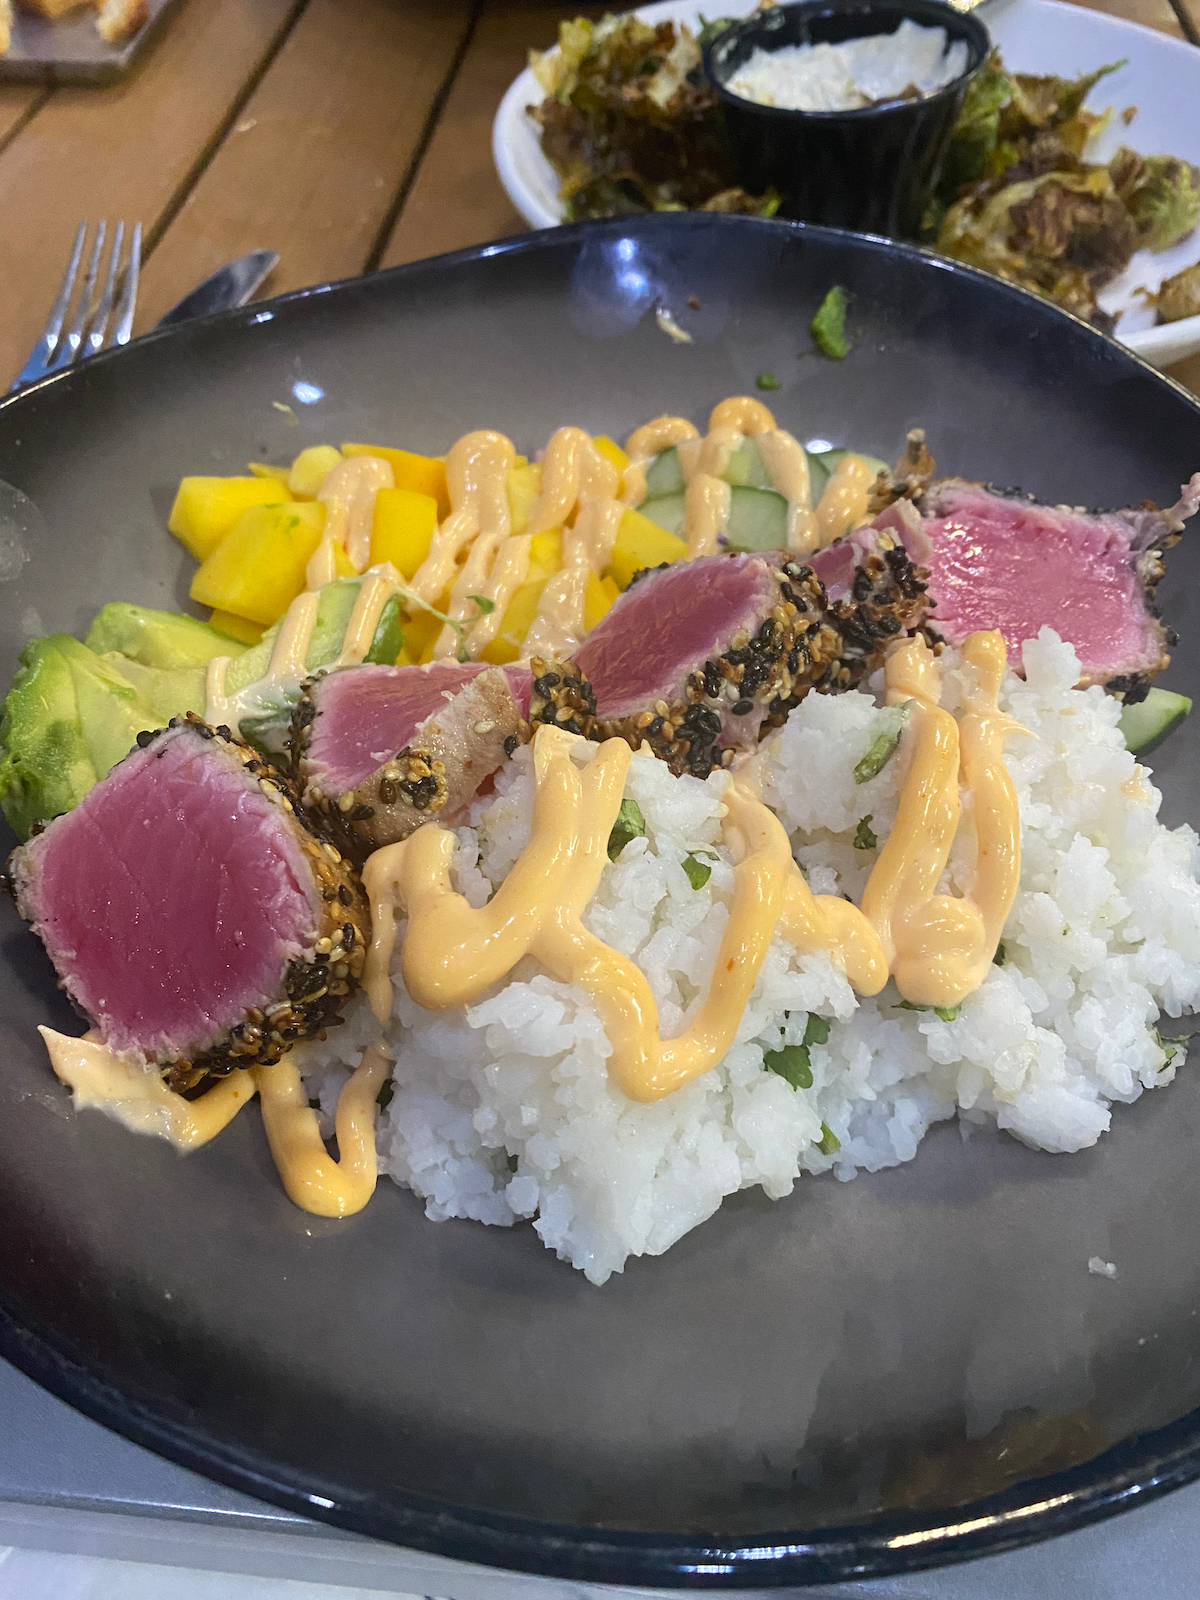 Ahi tuna bowl at drafthouse in Janesville, Wisconsin